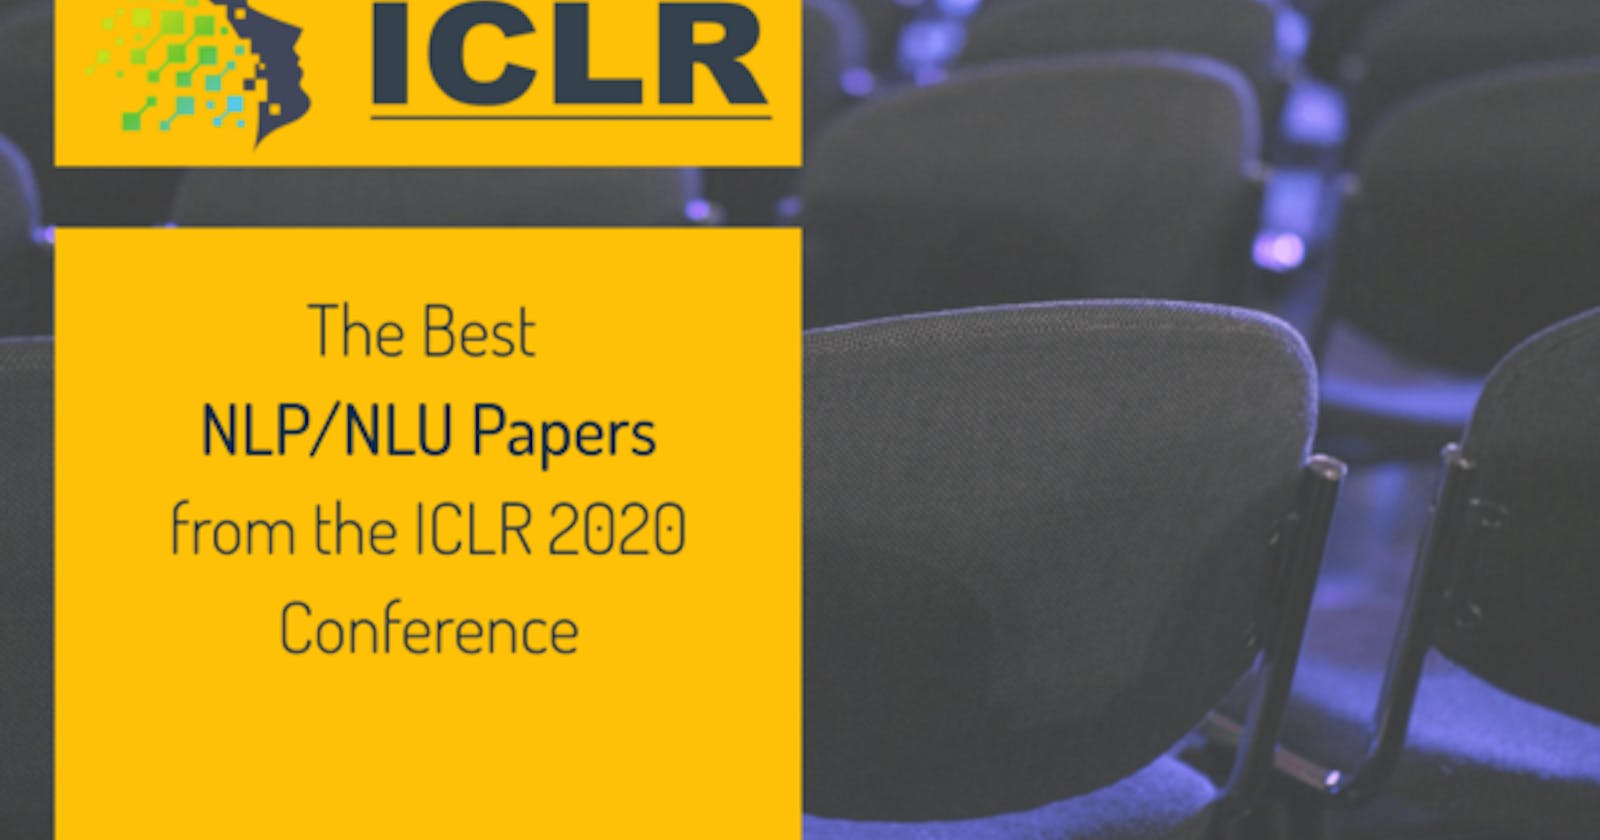 The Best NLP/NLU Papers from the ICLR 2020 Conference